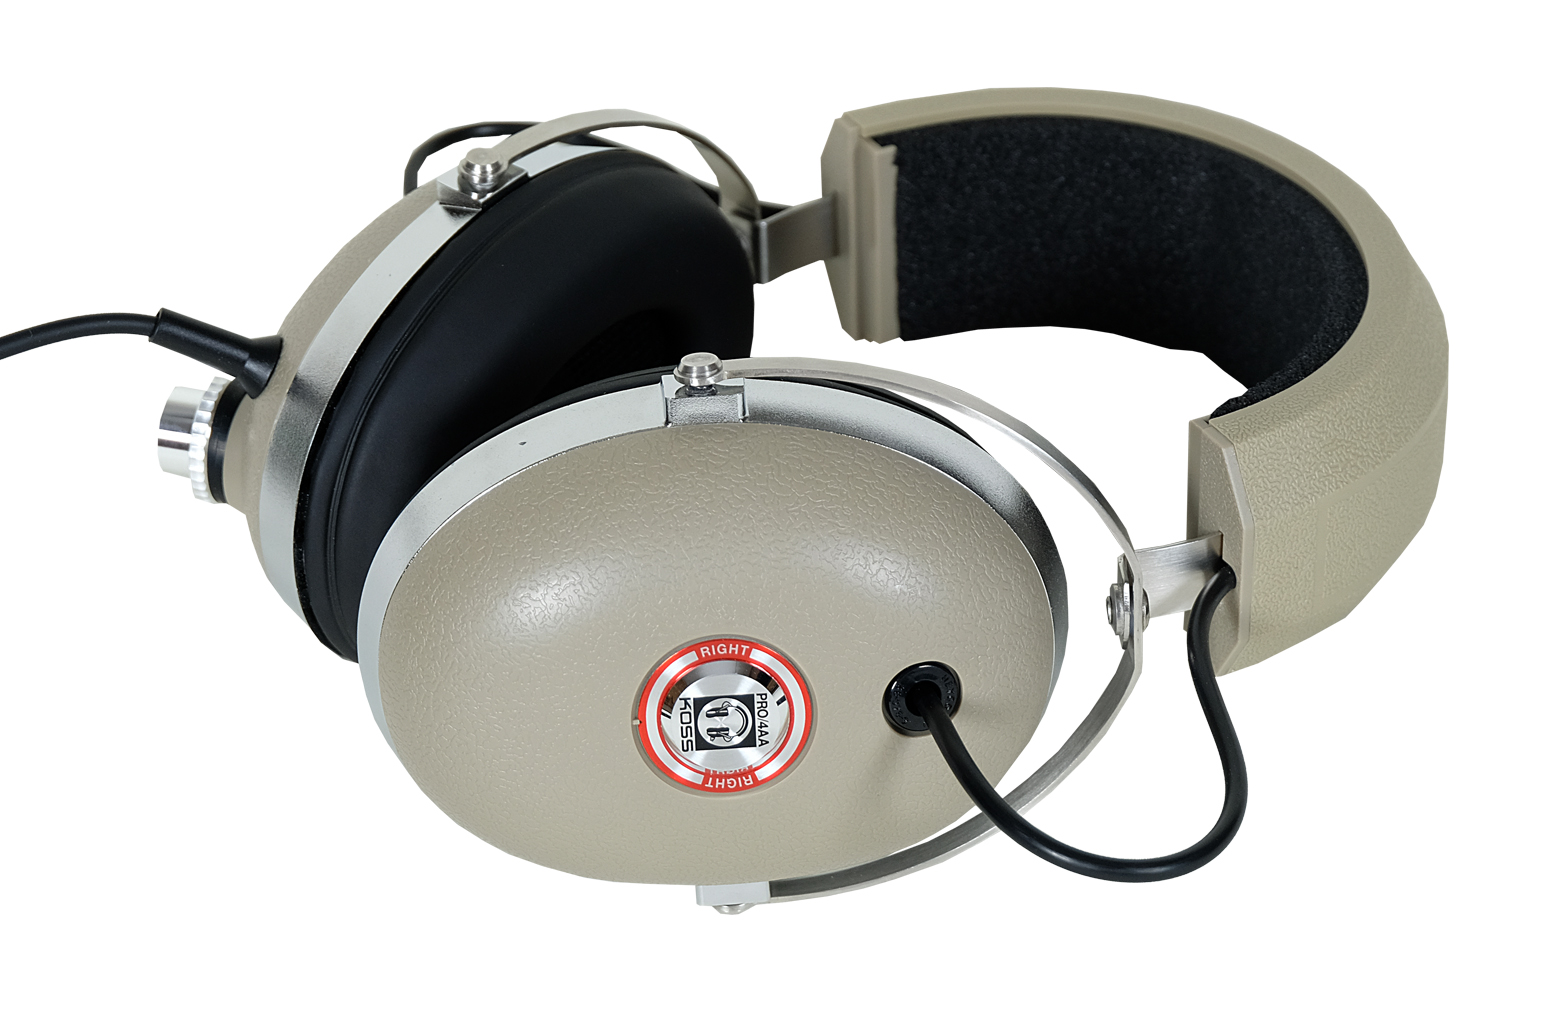 Koss PRO AA headphones. Classic Vintage. Stand included in the price.